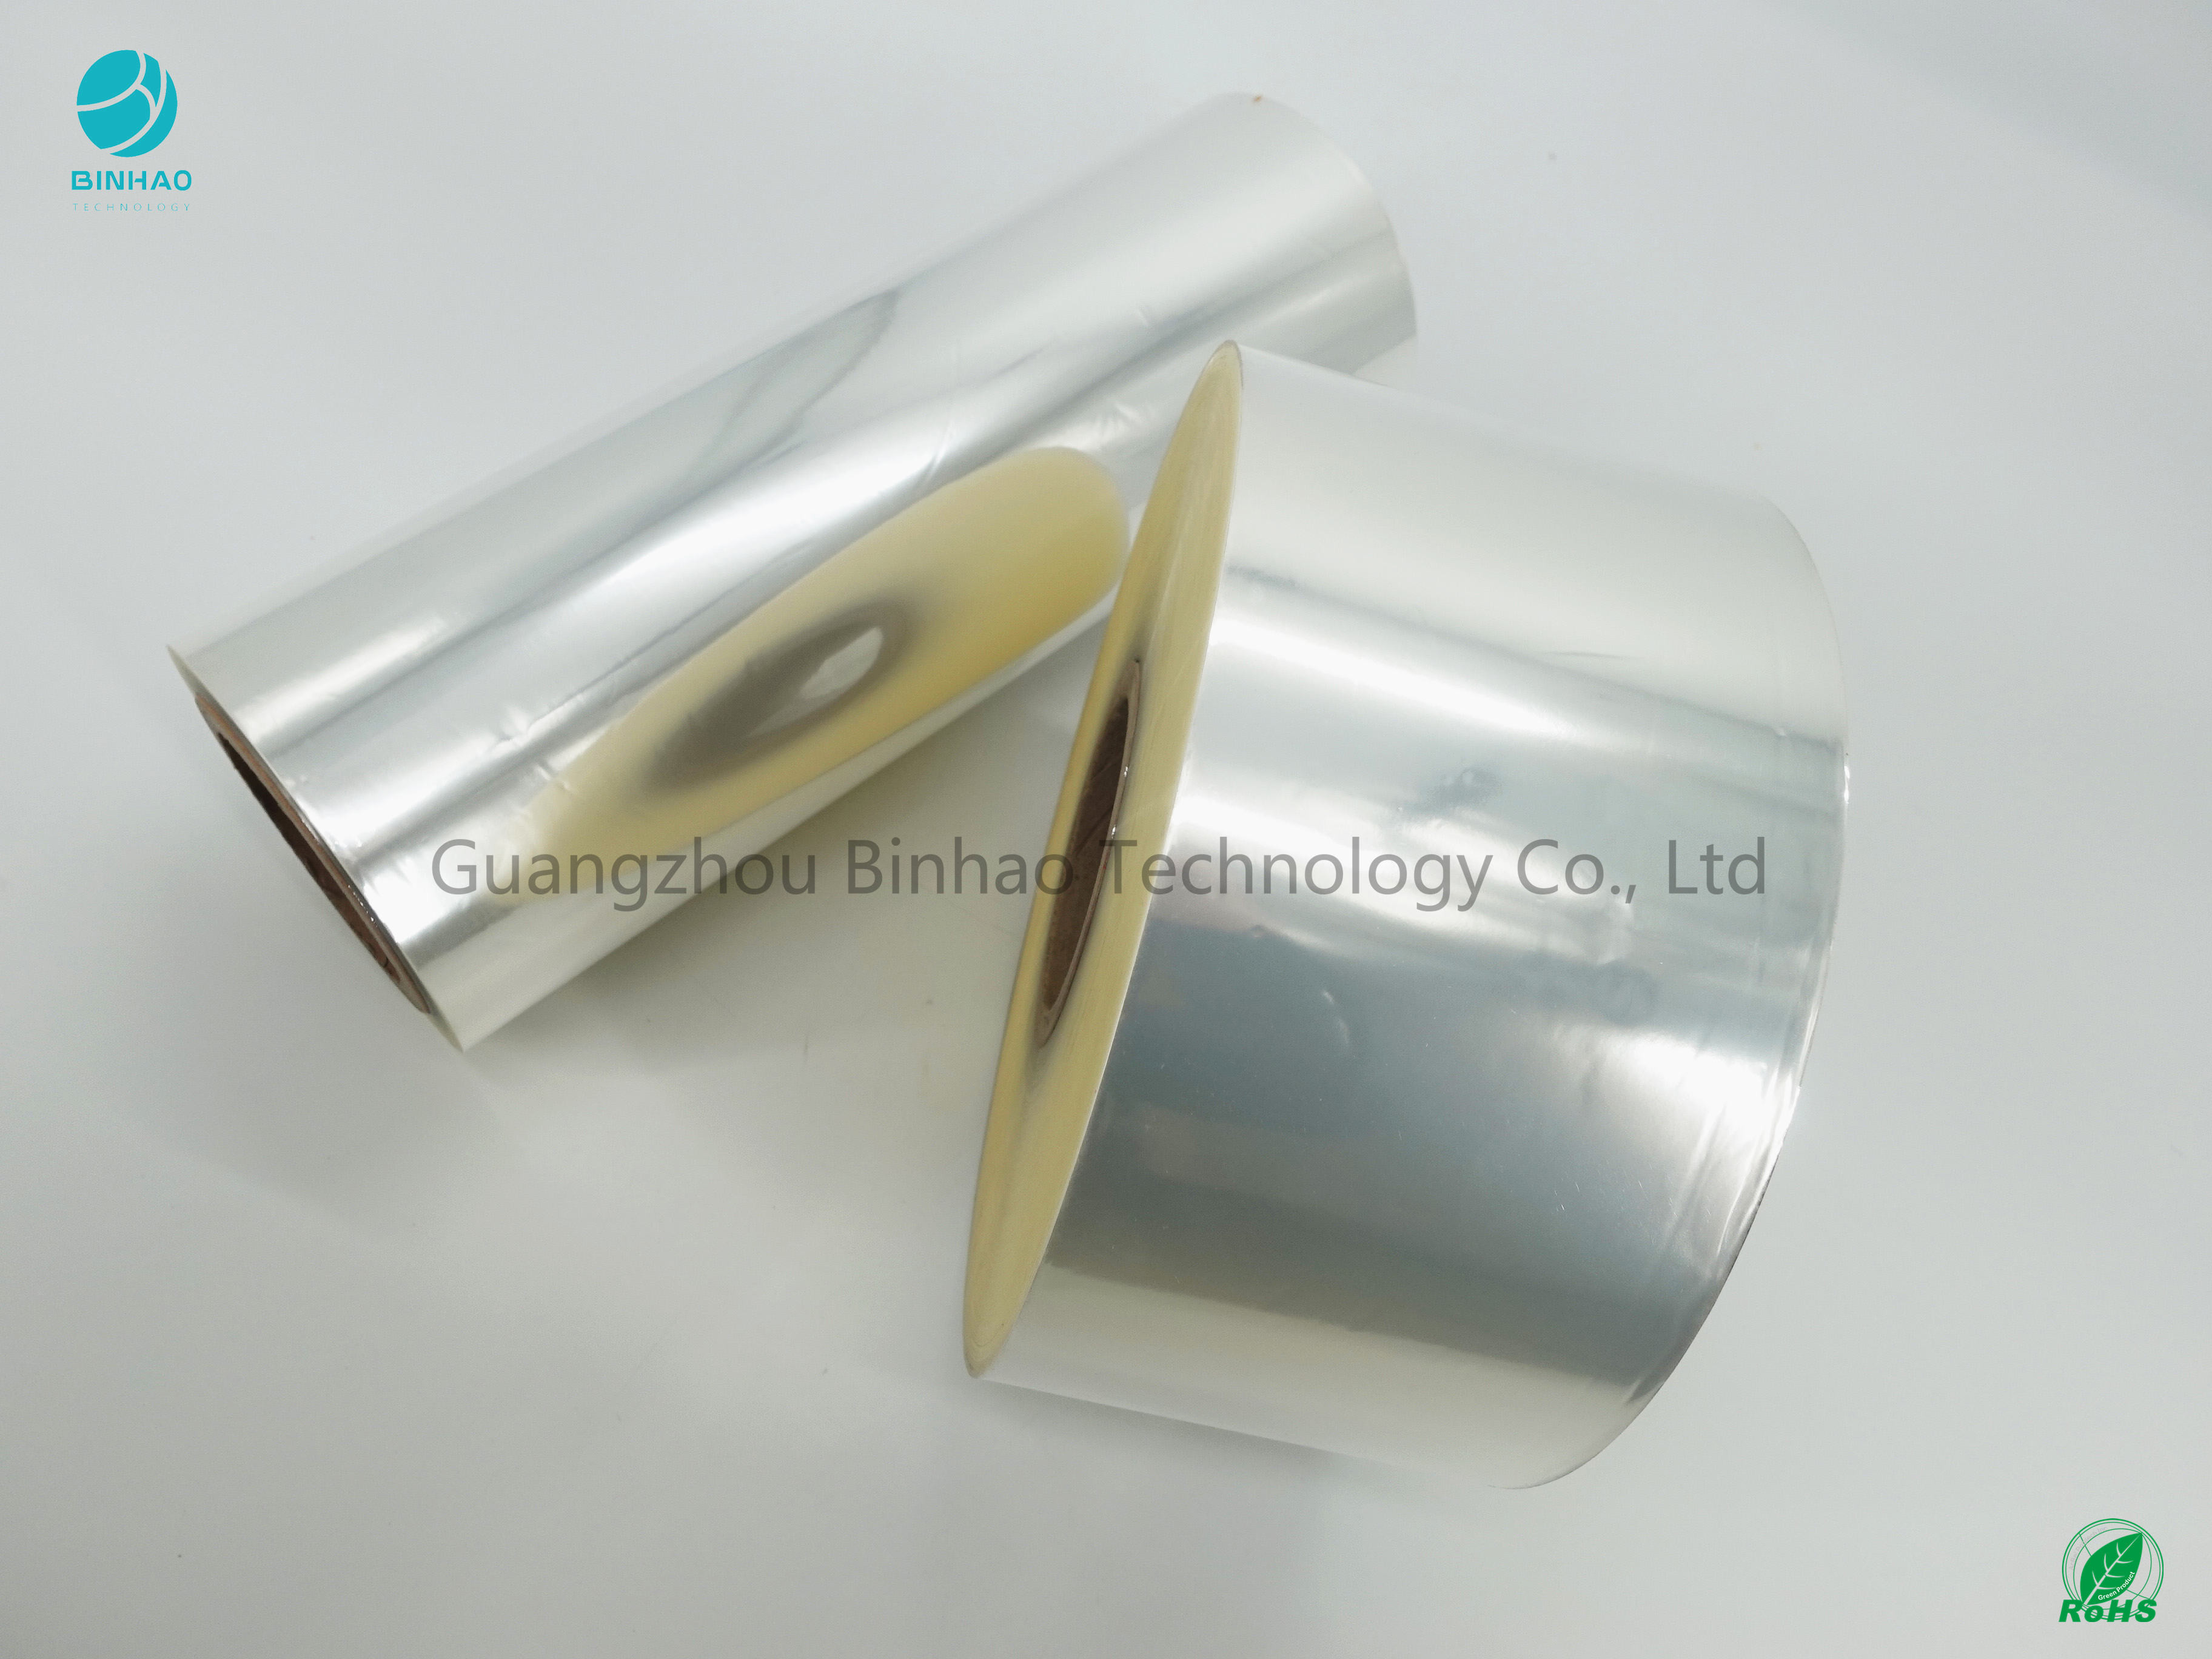 Tobacco Package Film BOPP Film Roll Super Clear 350mm Long Cases Size